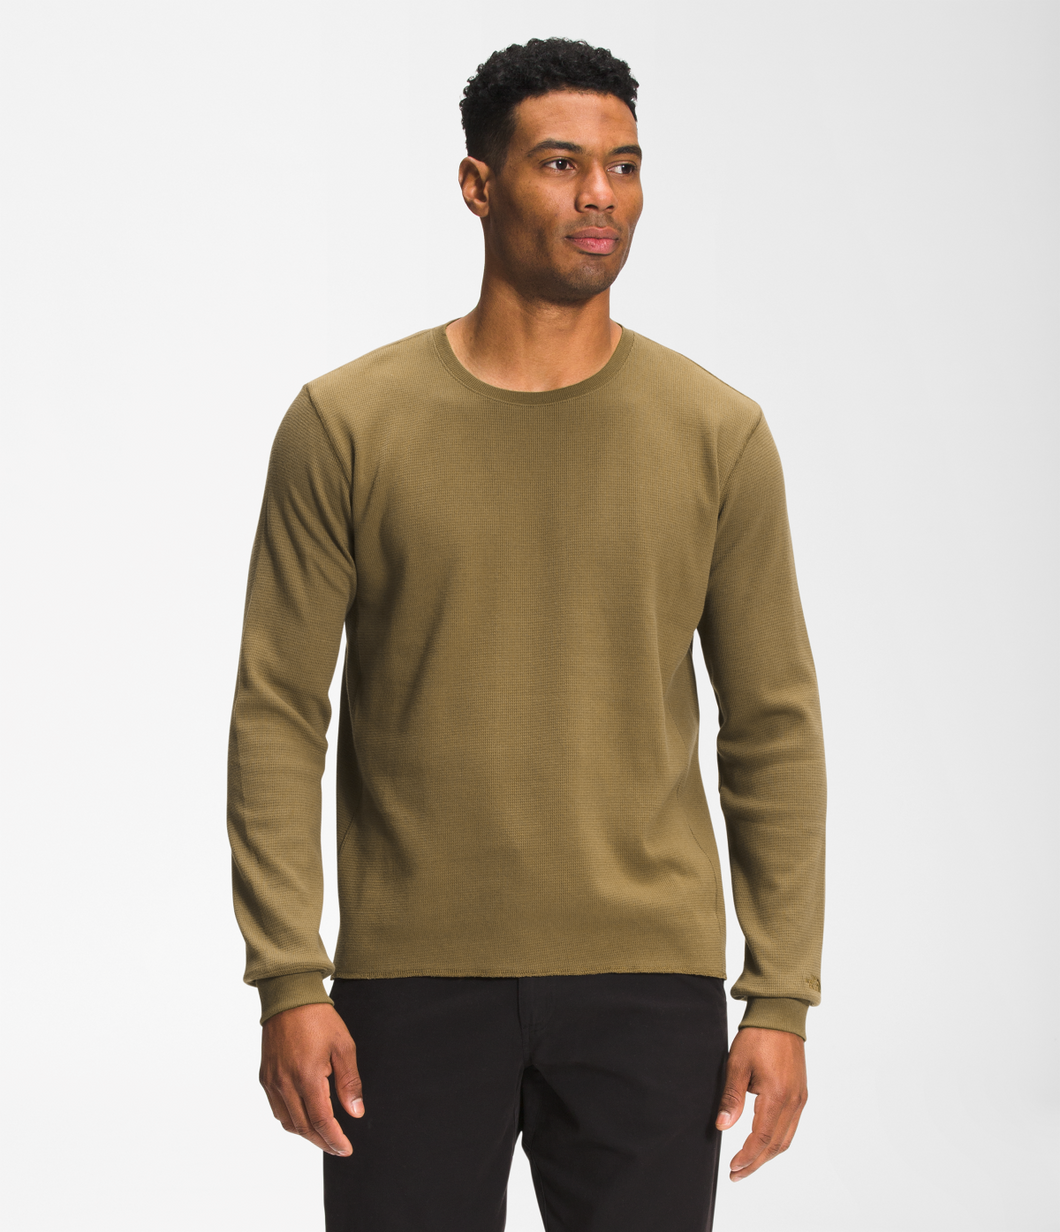 'The North Face' Men's All-Season Waffle Thermal - Military Olive